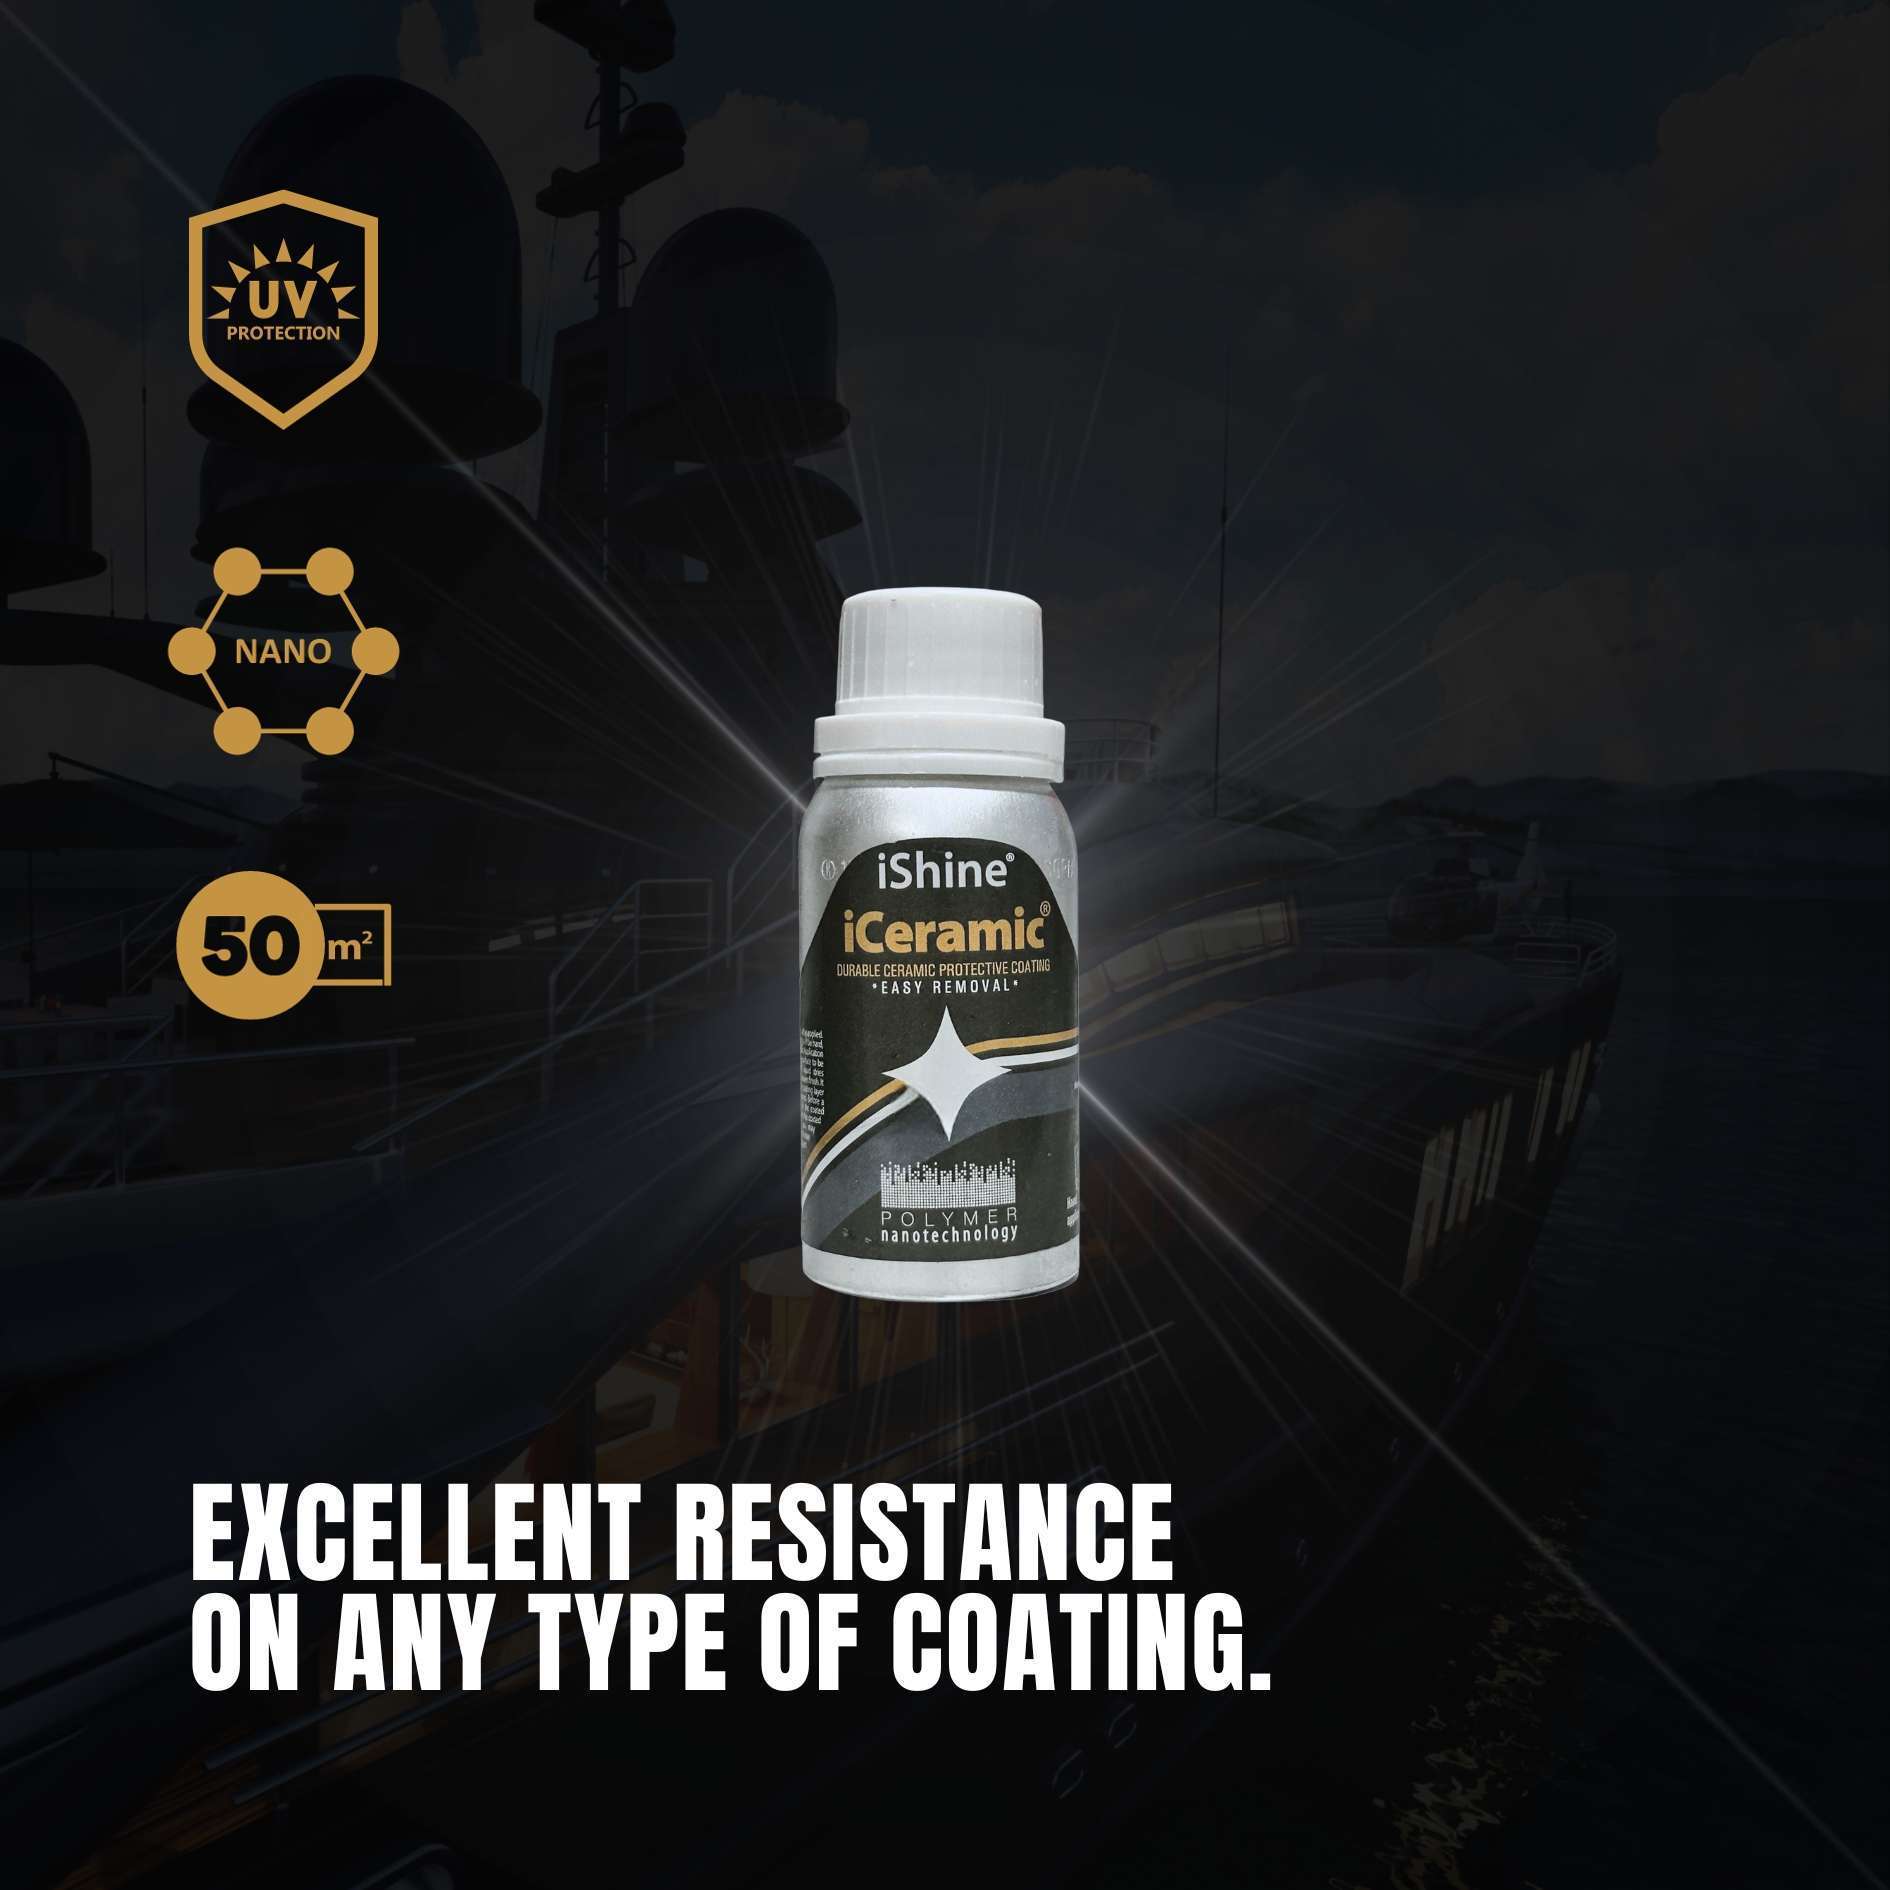 Home Ceramic Coating - Shine & Protect all Home Surfaces!